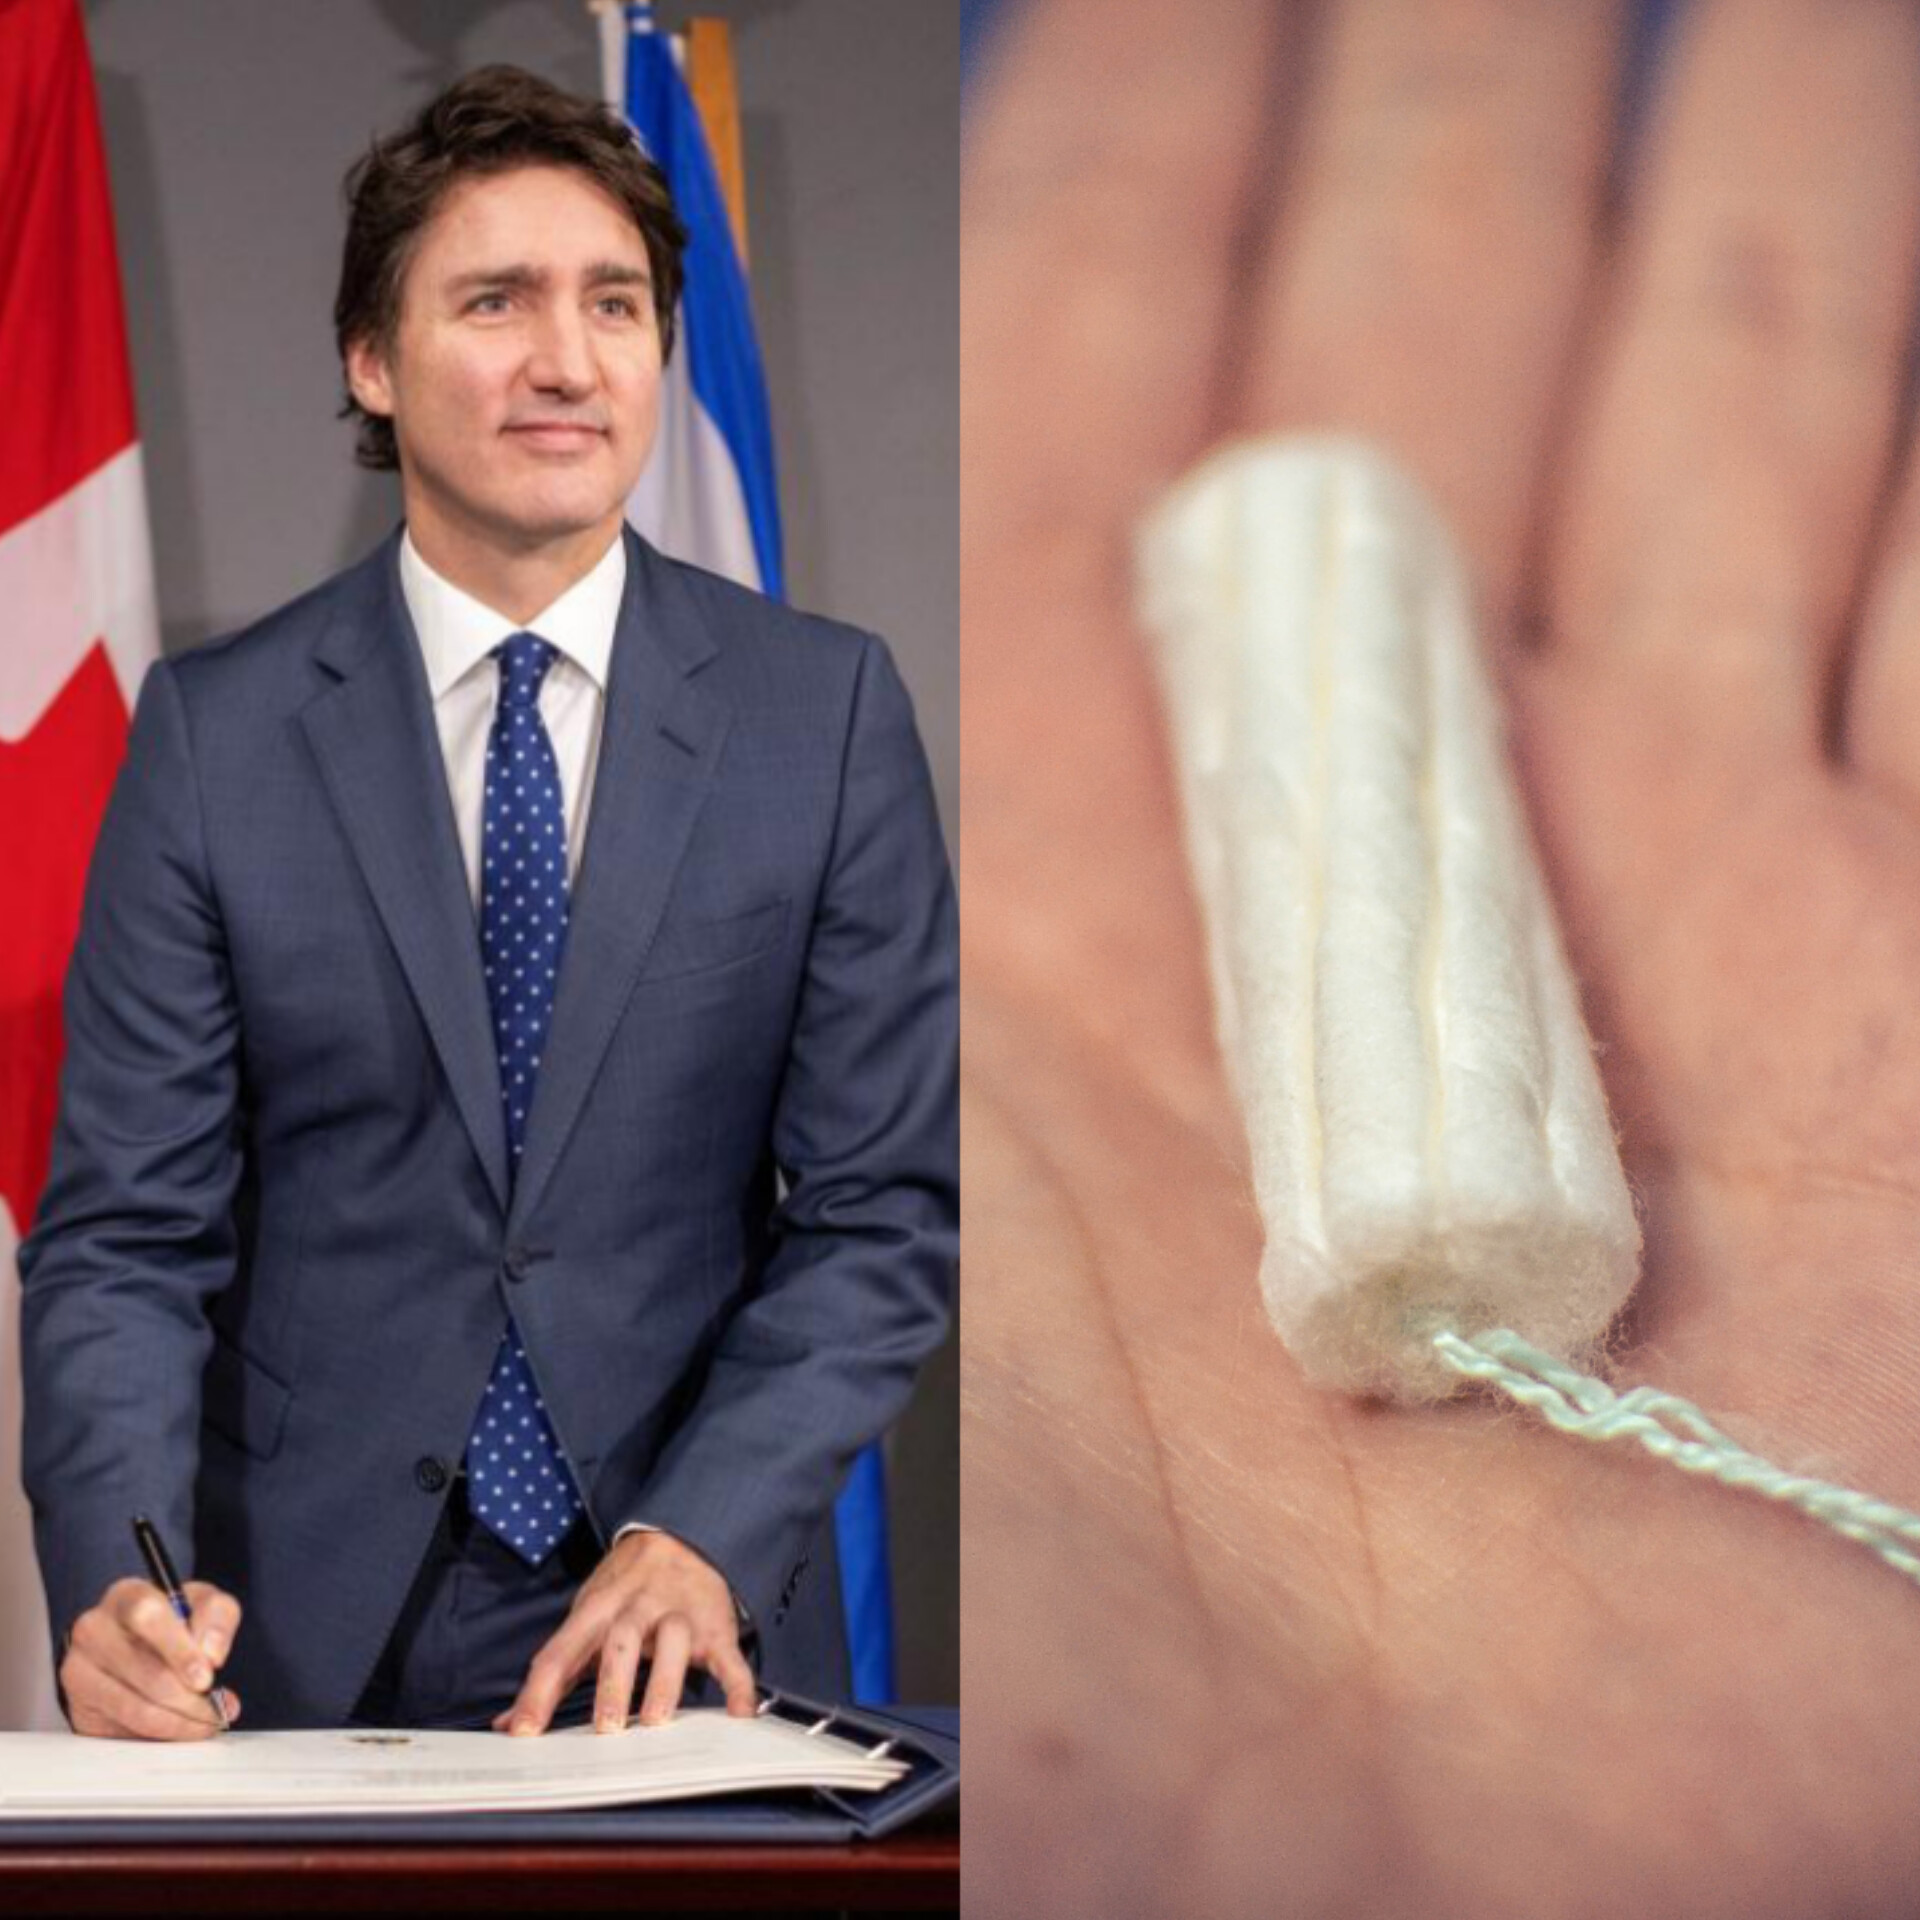 Canada legalizes use of tampons in men